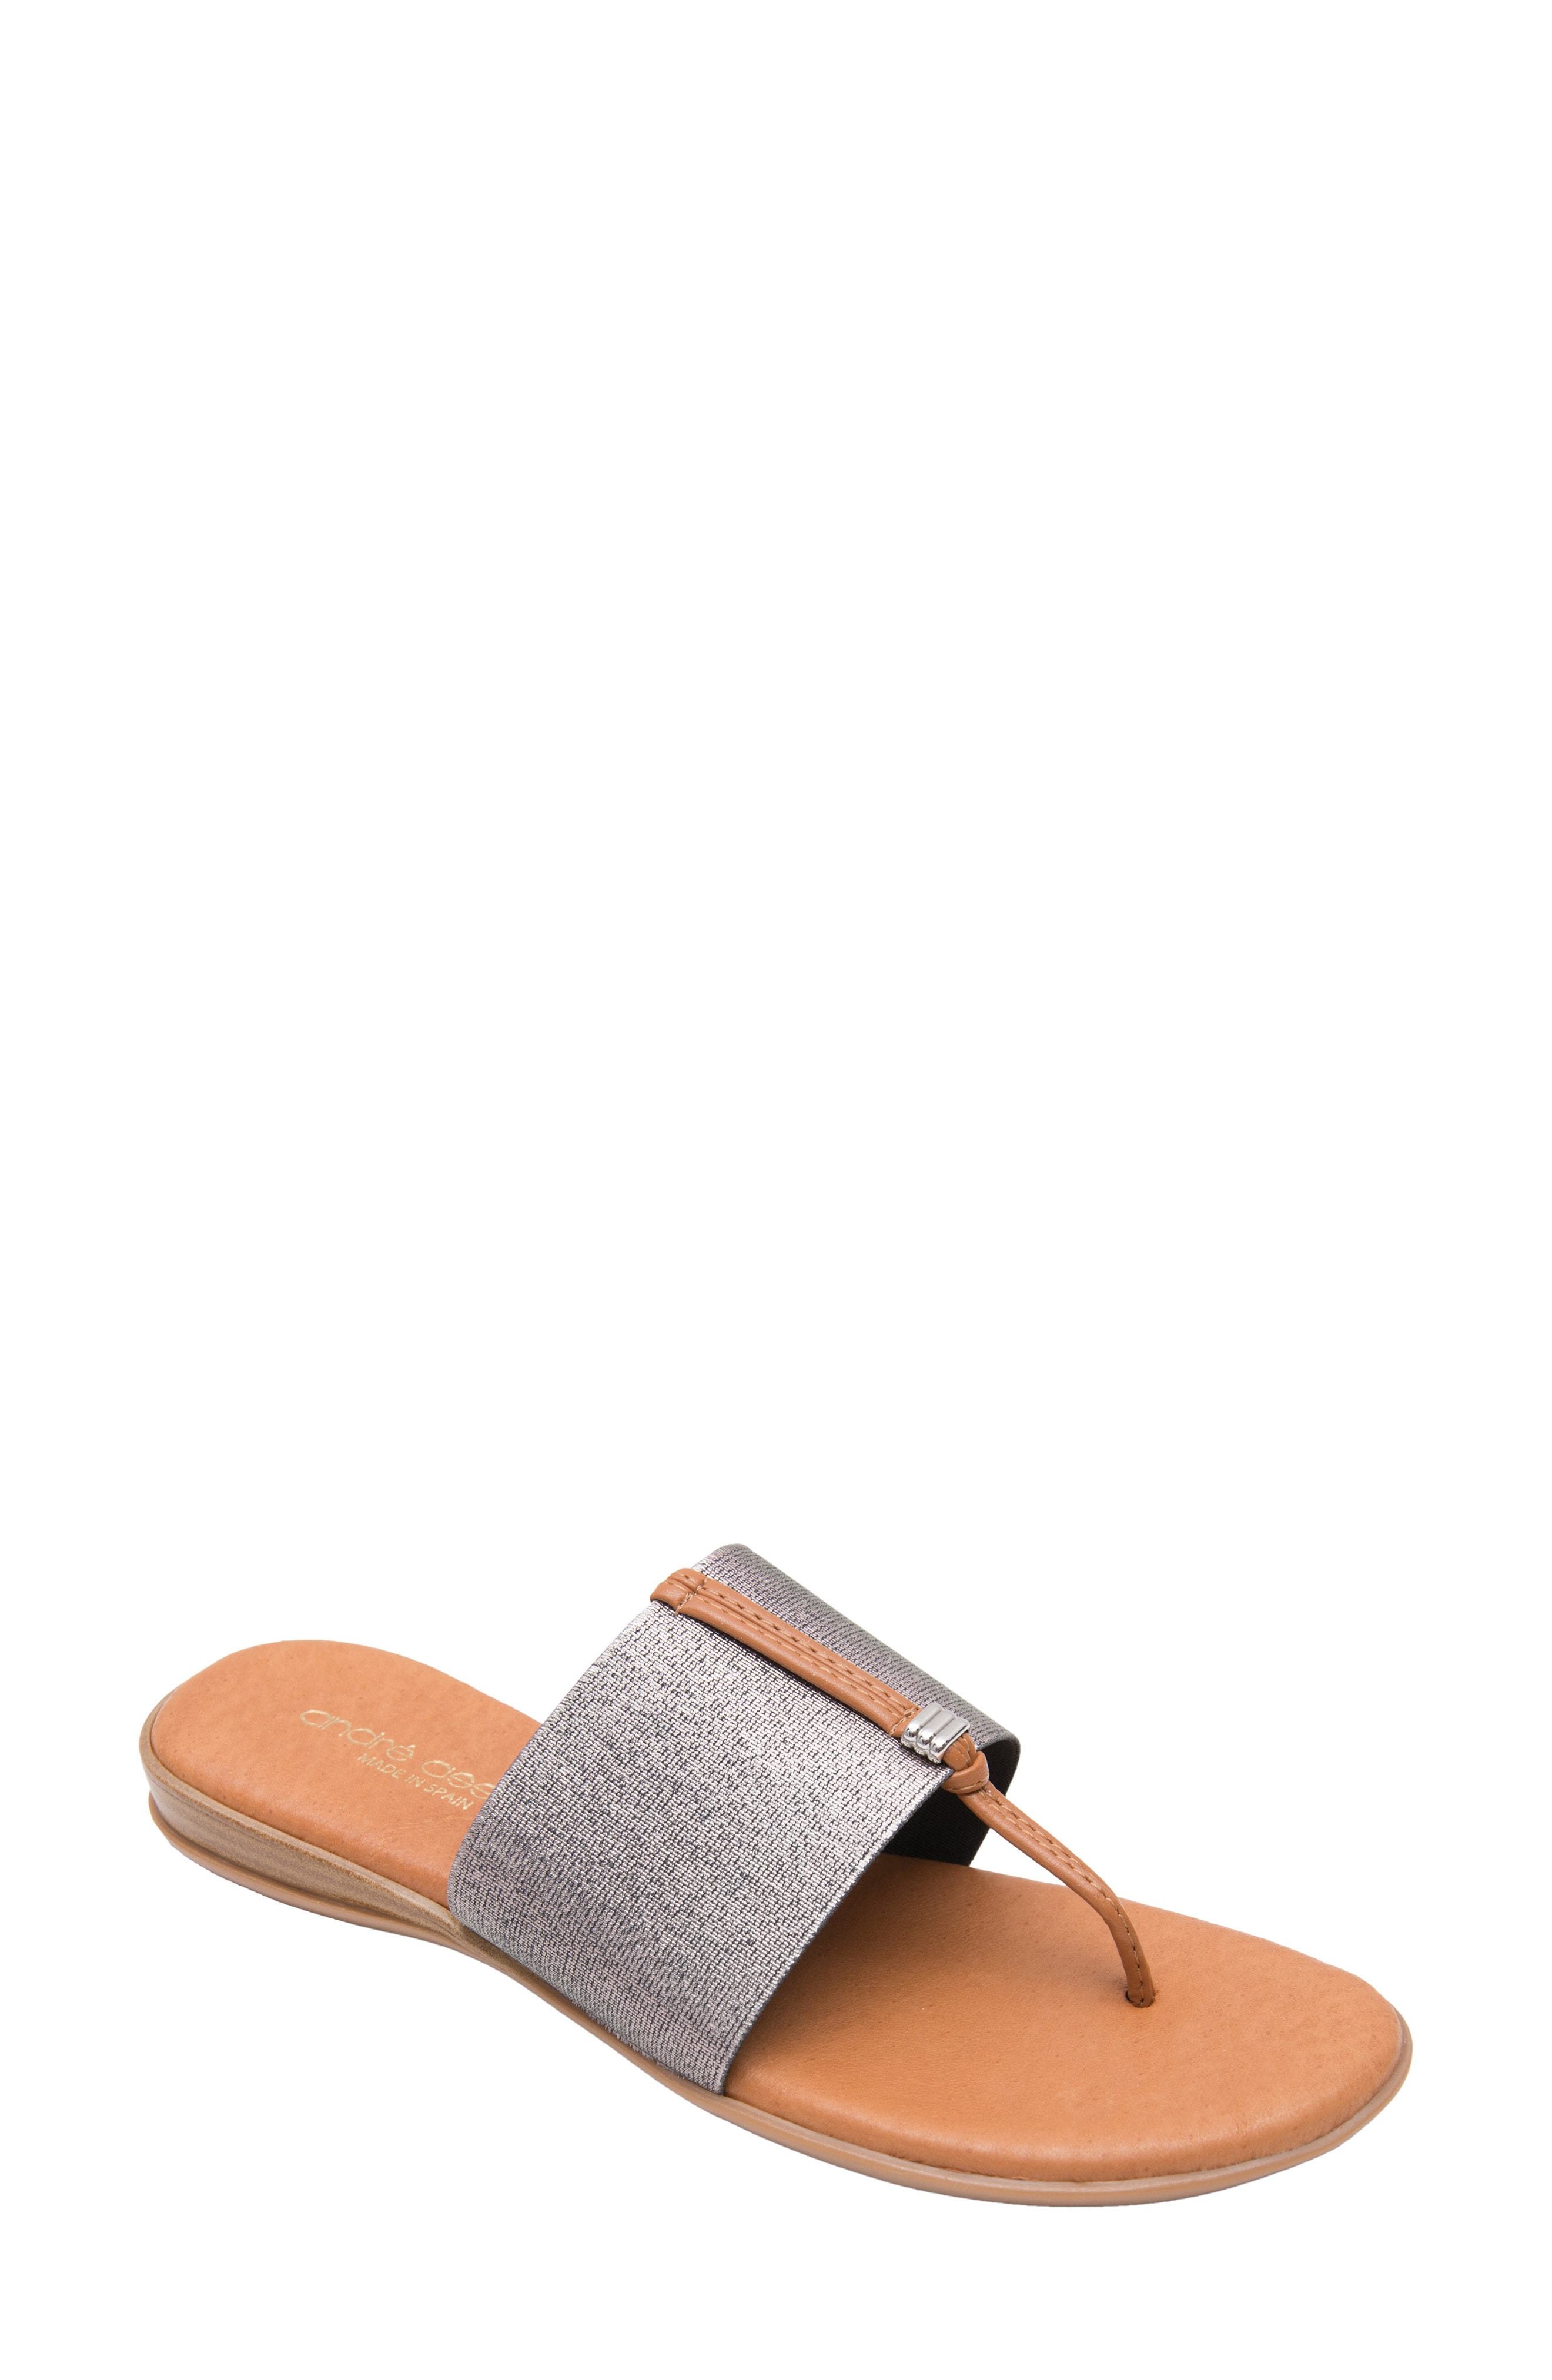 Andre Assous Nice Sandal, $97 | Nordstrom | Lookastic